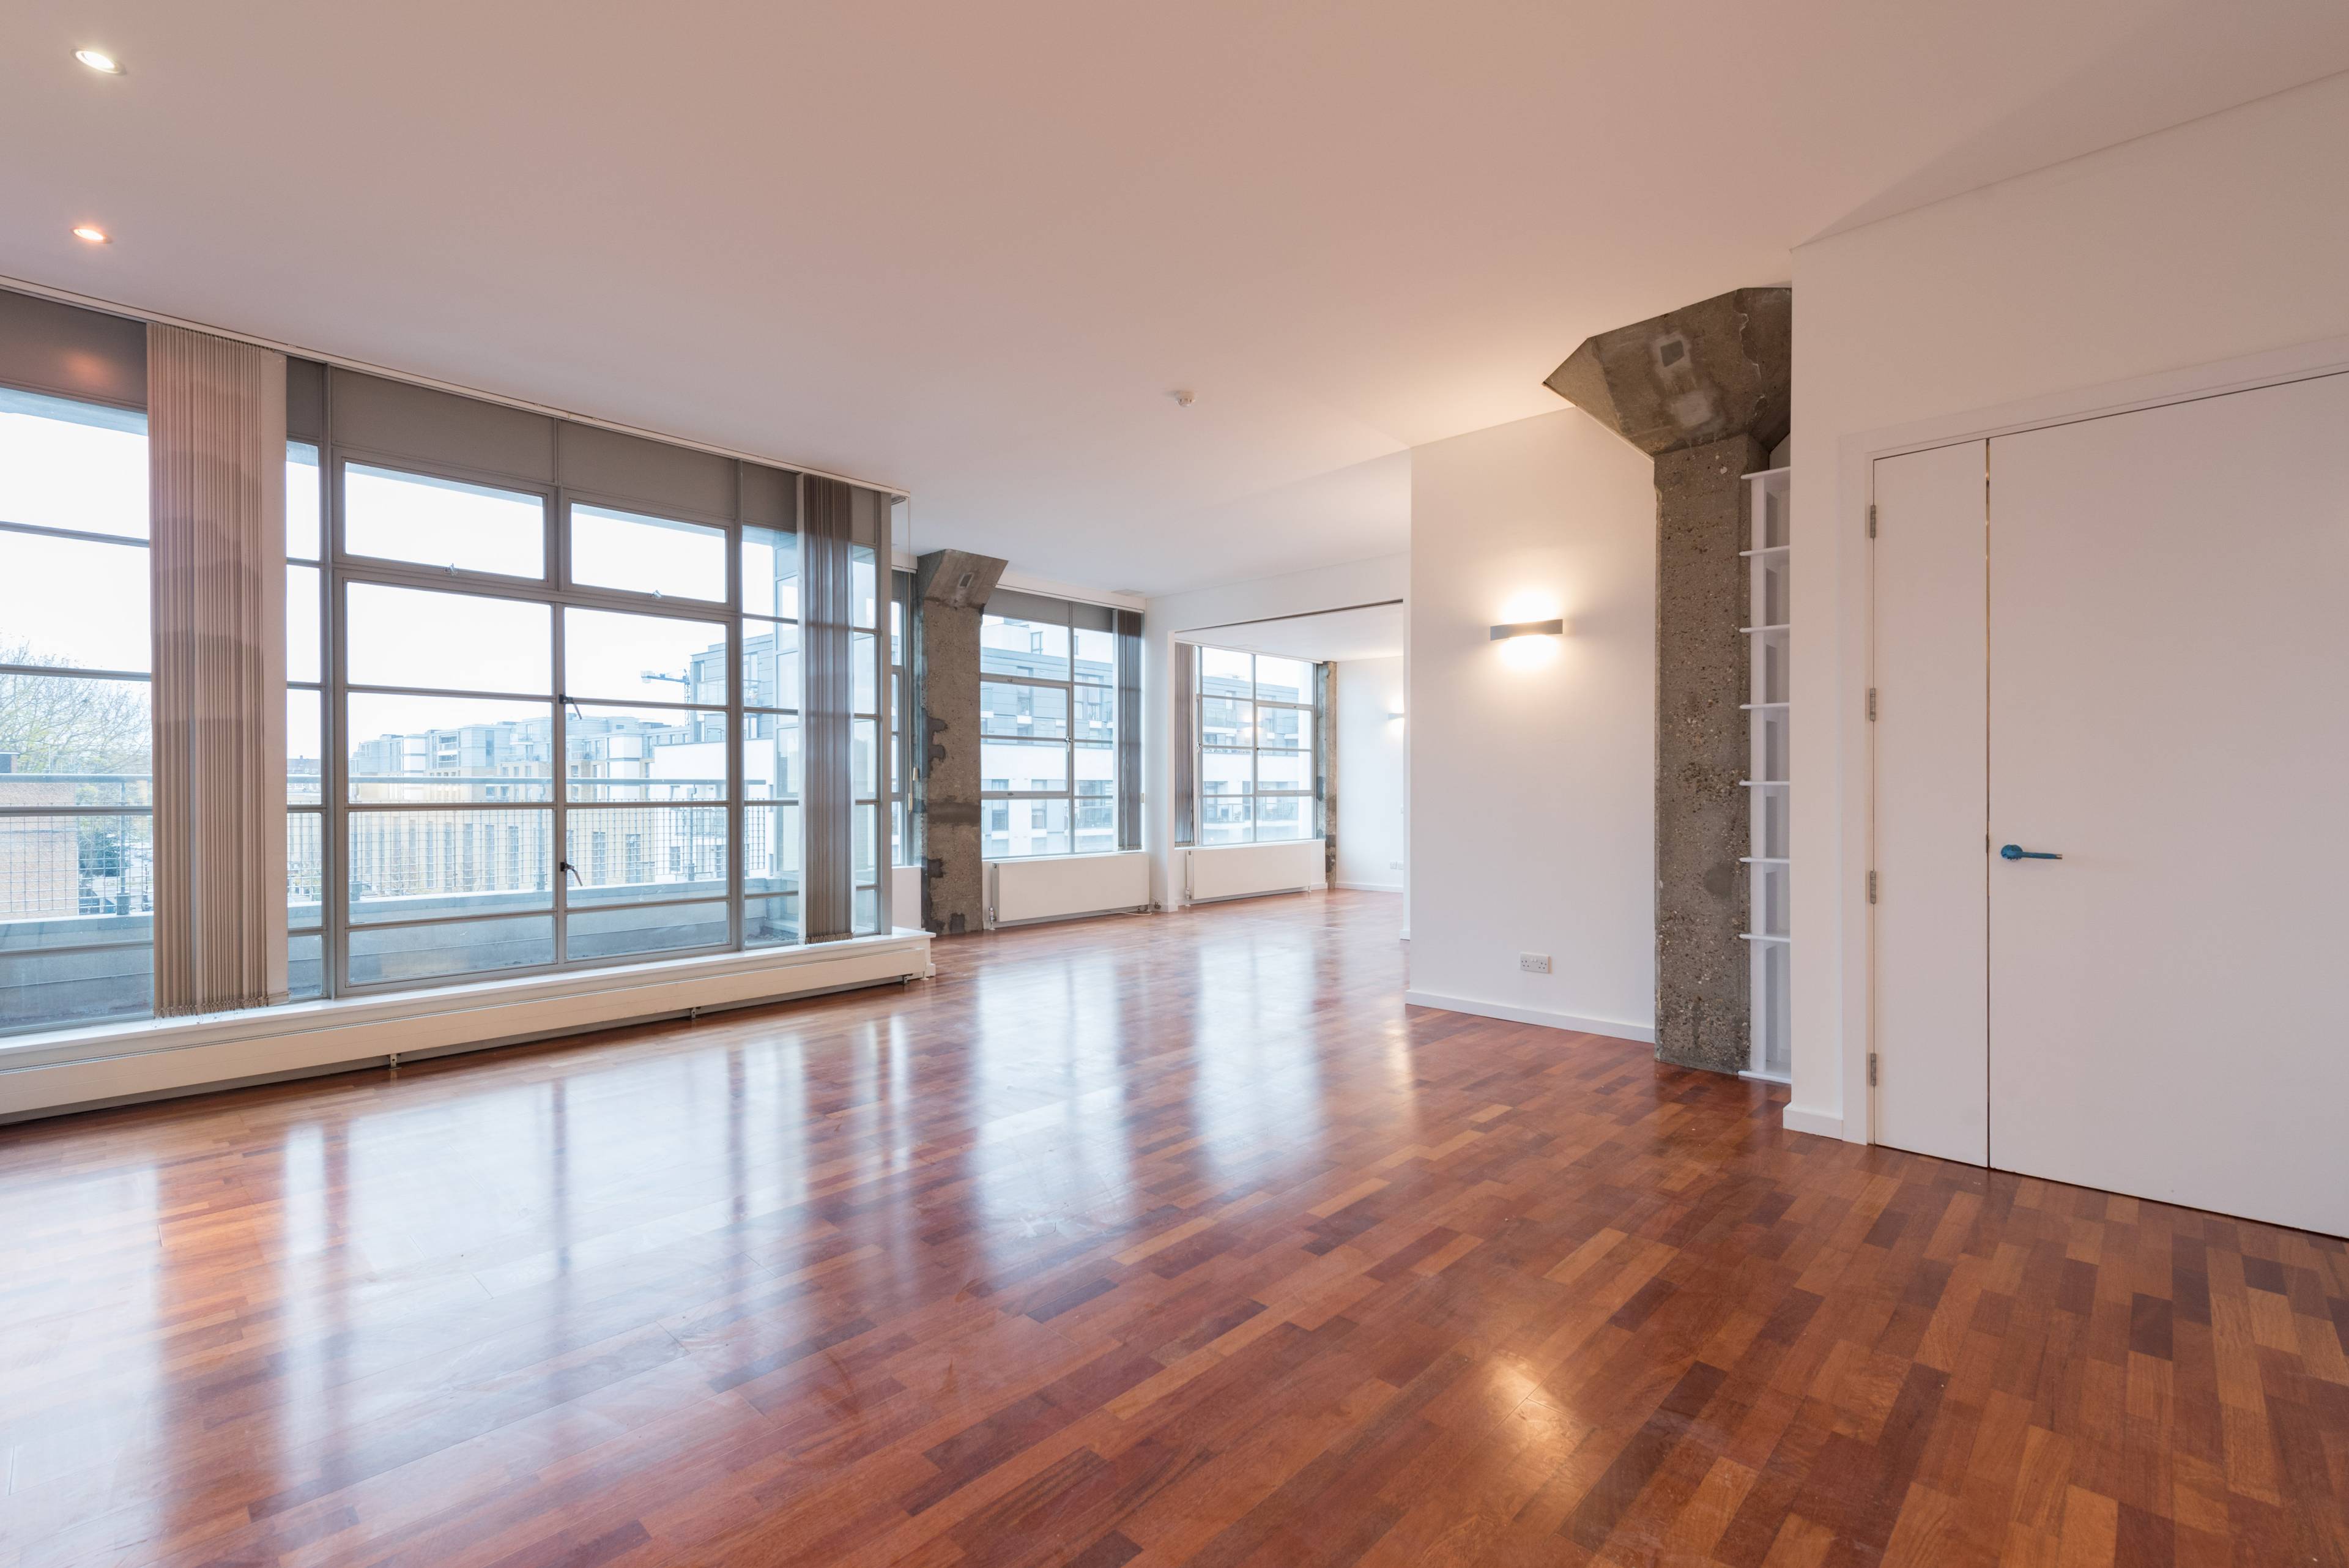 Amazing open-plan loft apartment with lovely views of the Regent's Canal in Shoreditch.